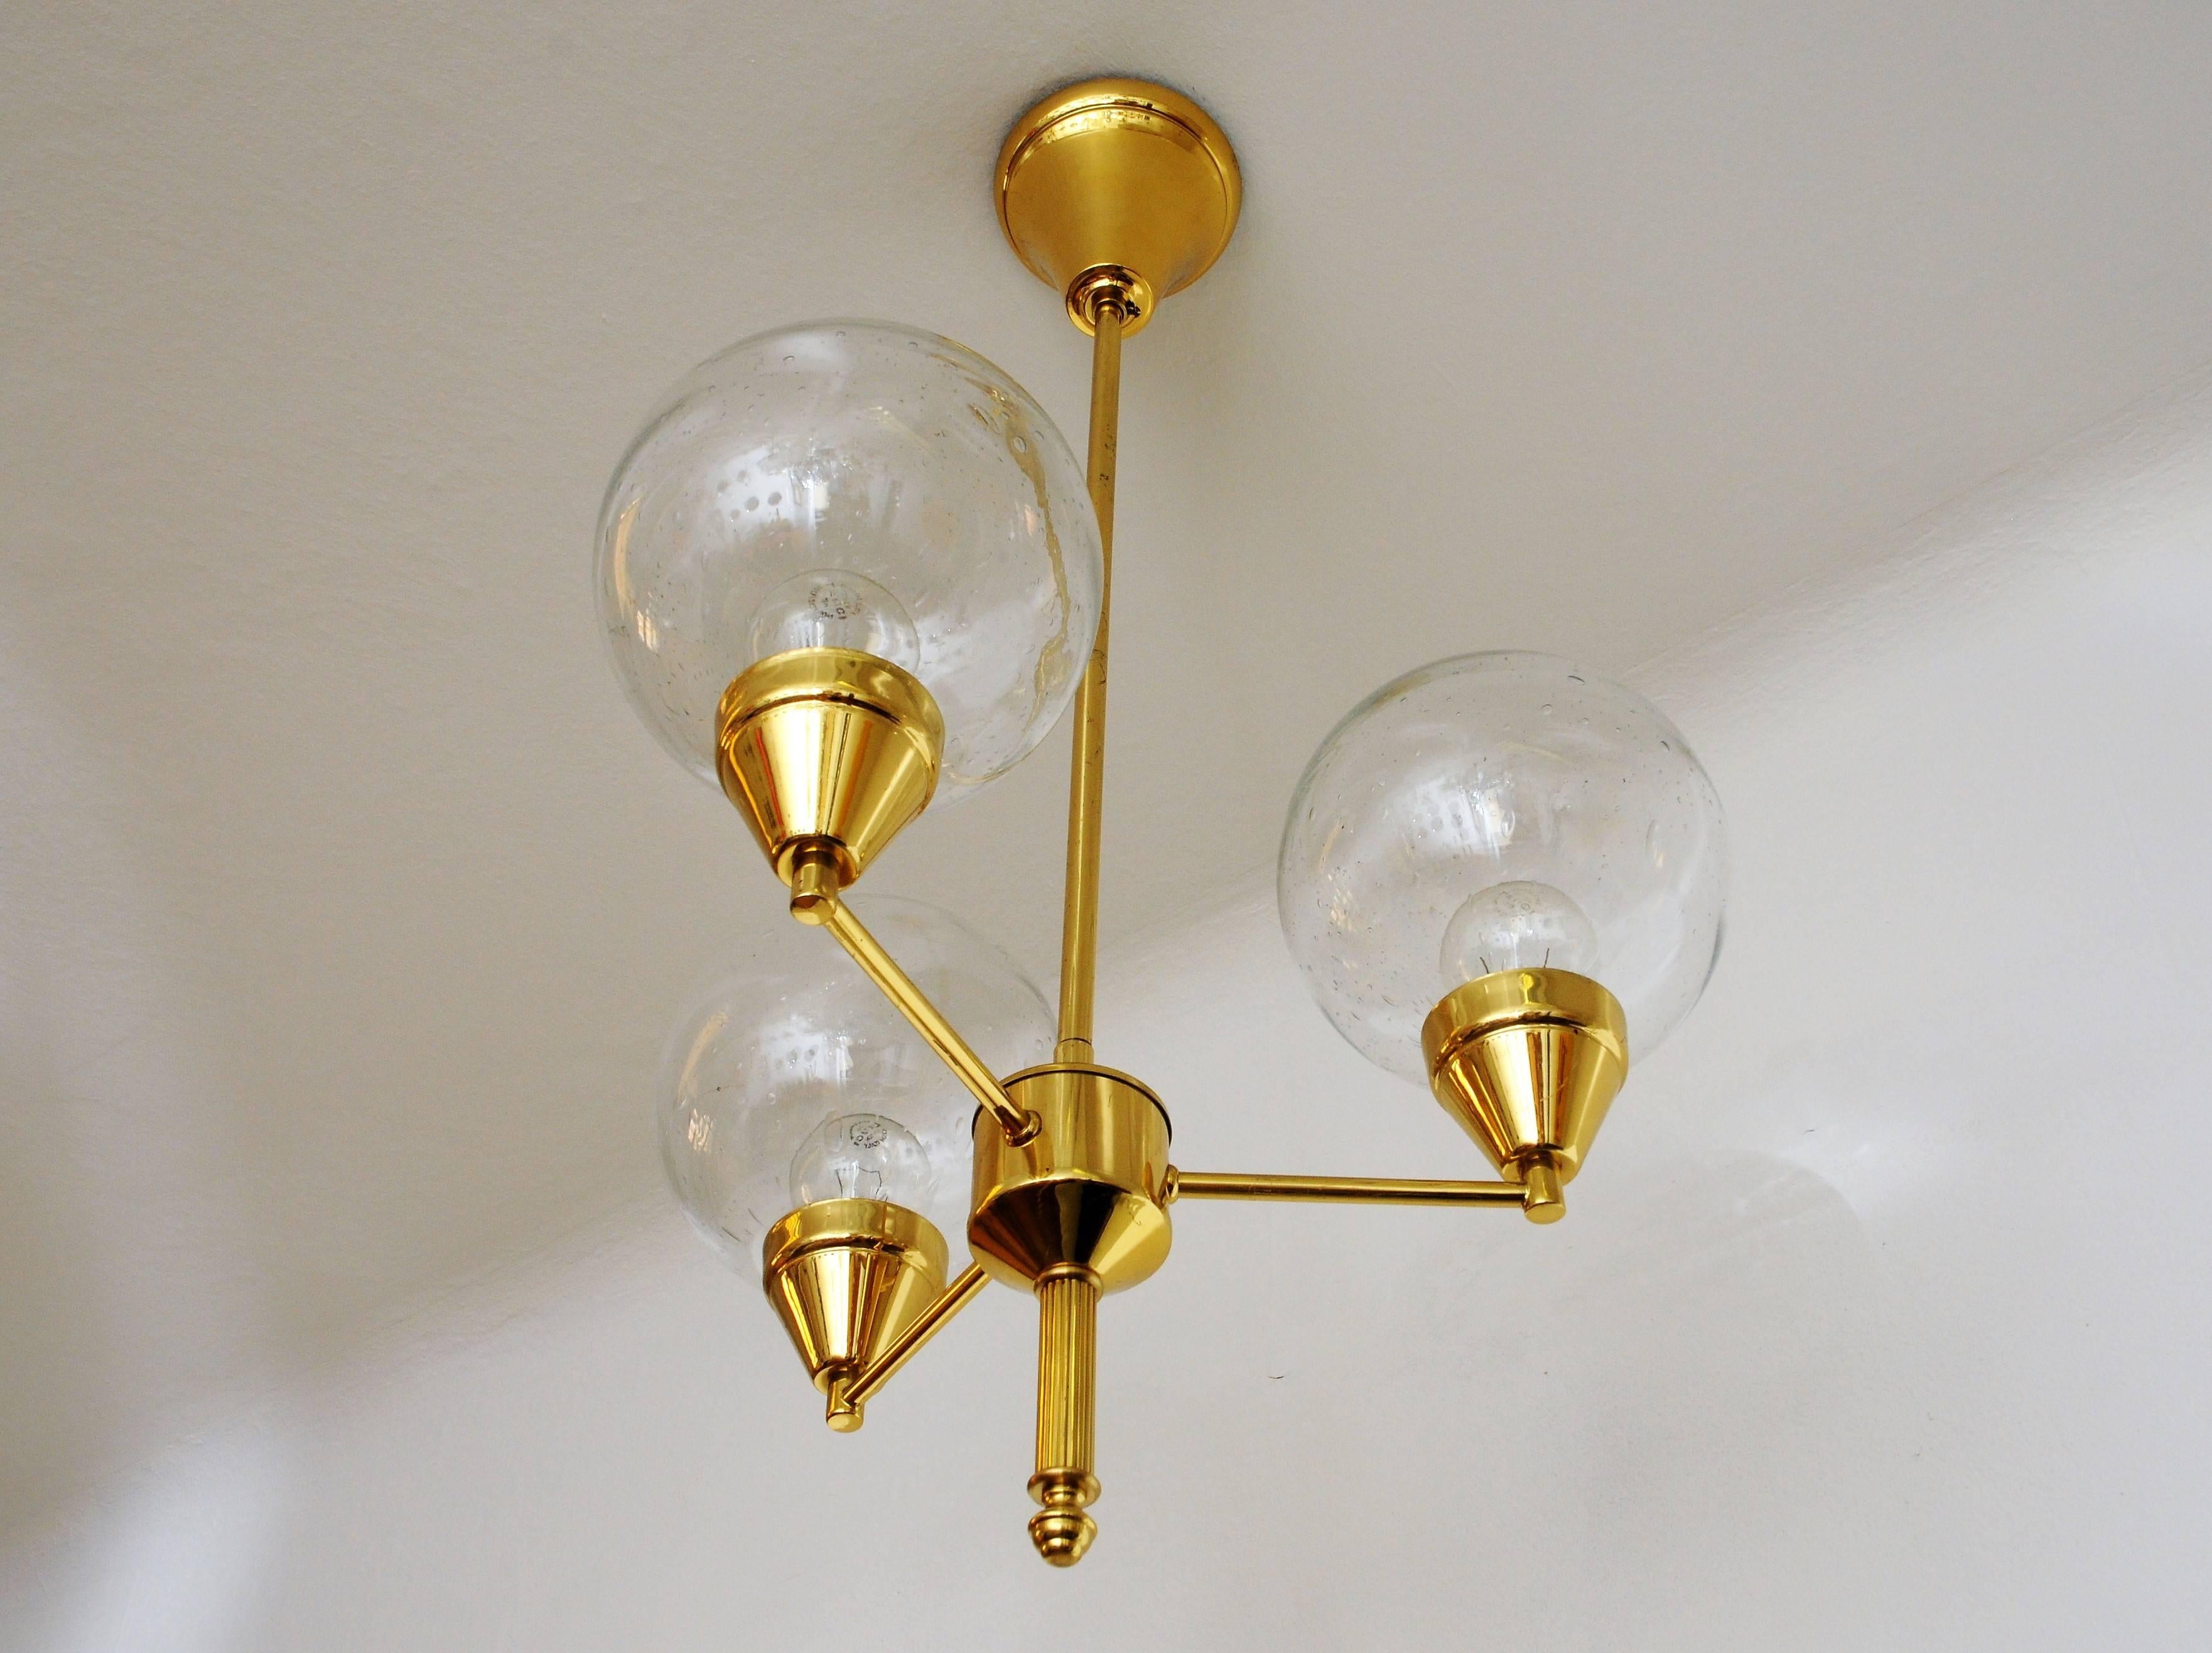 Scandinavian Modern Brass Ceiling Lamp with Three Clear Glass Domes 1960s, Sweden